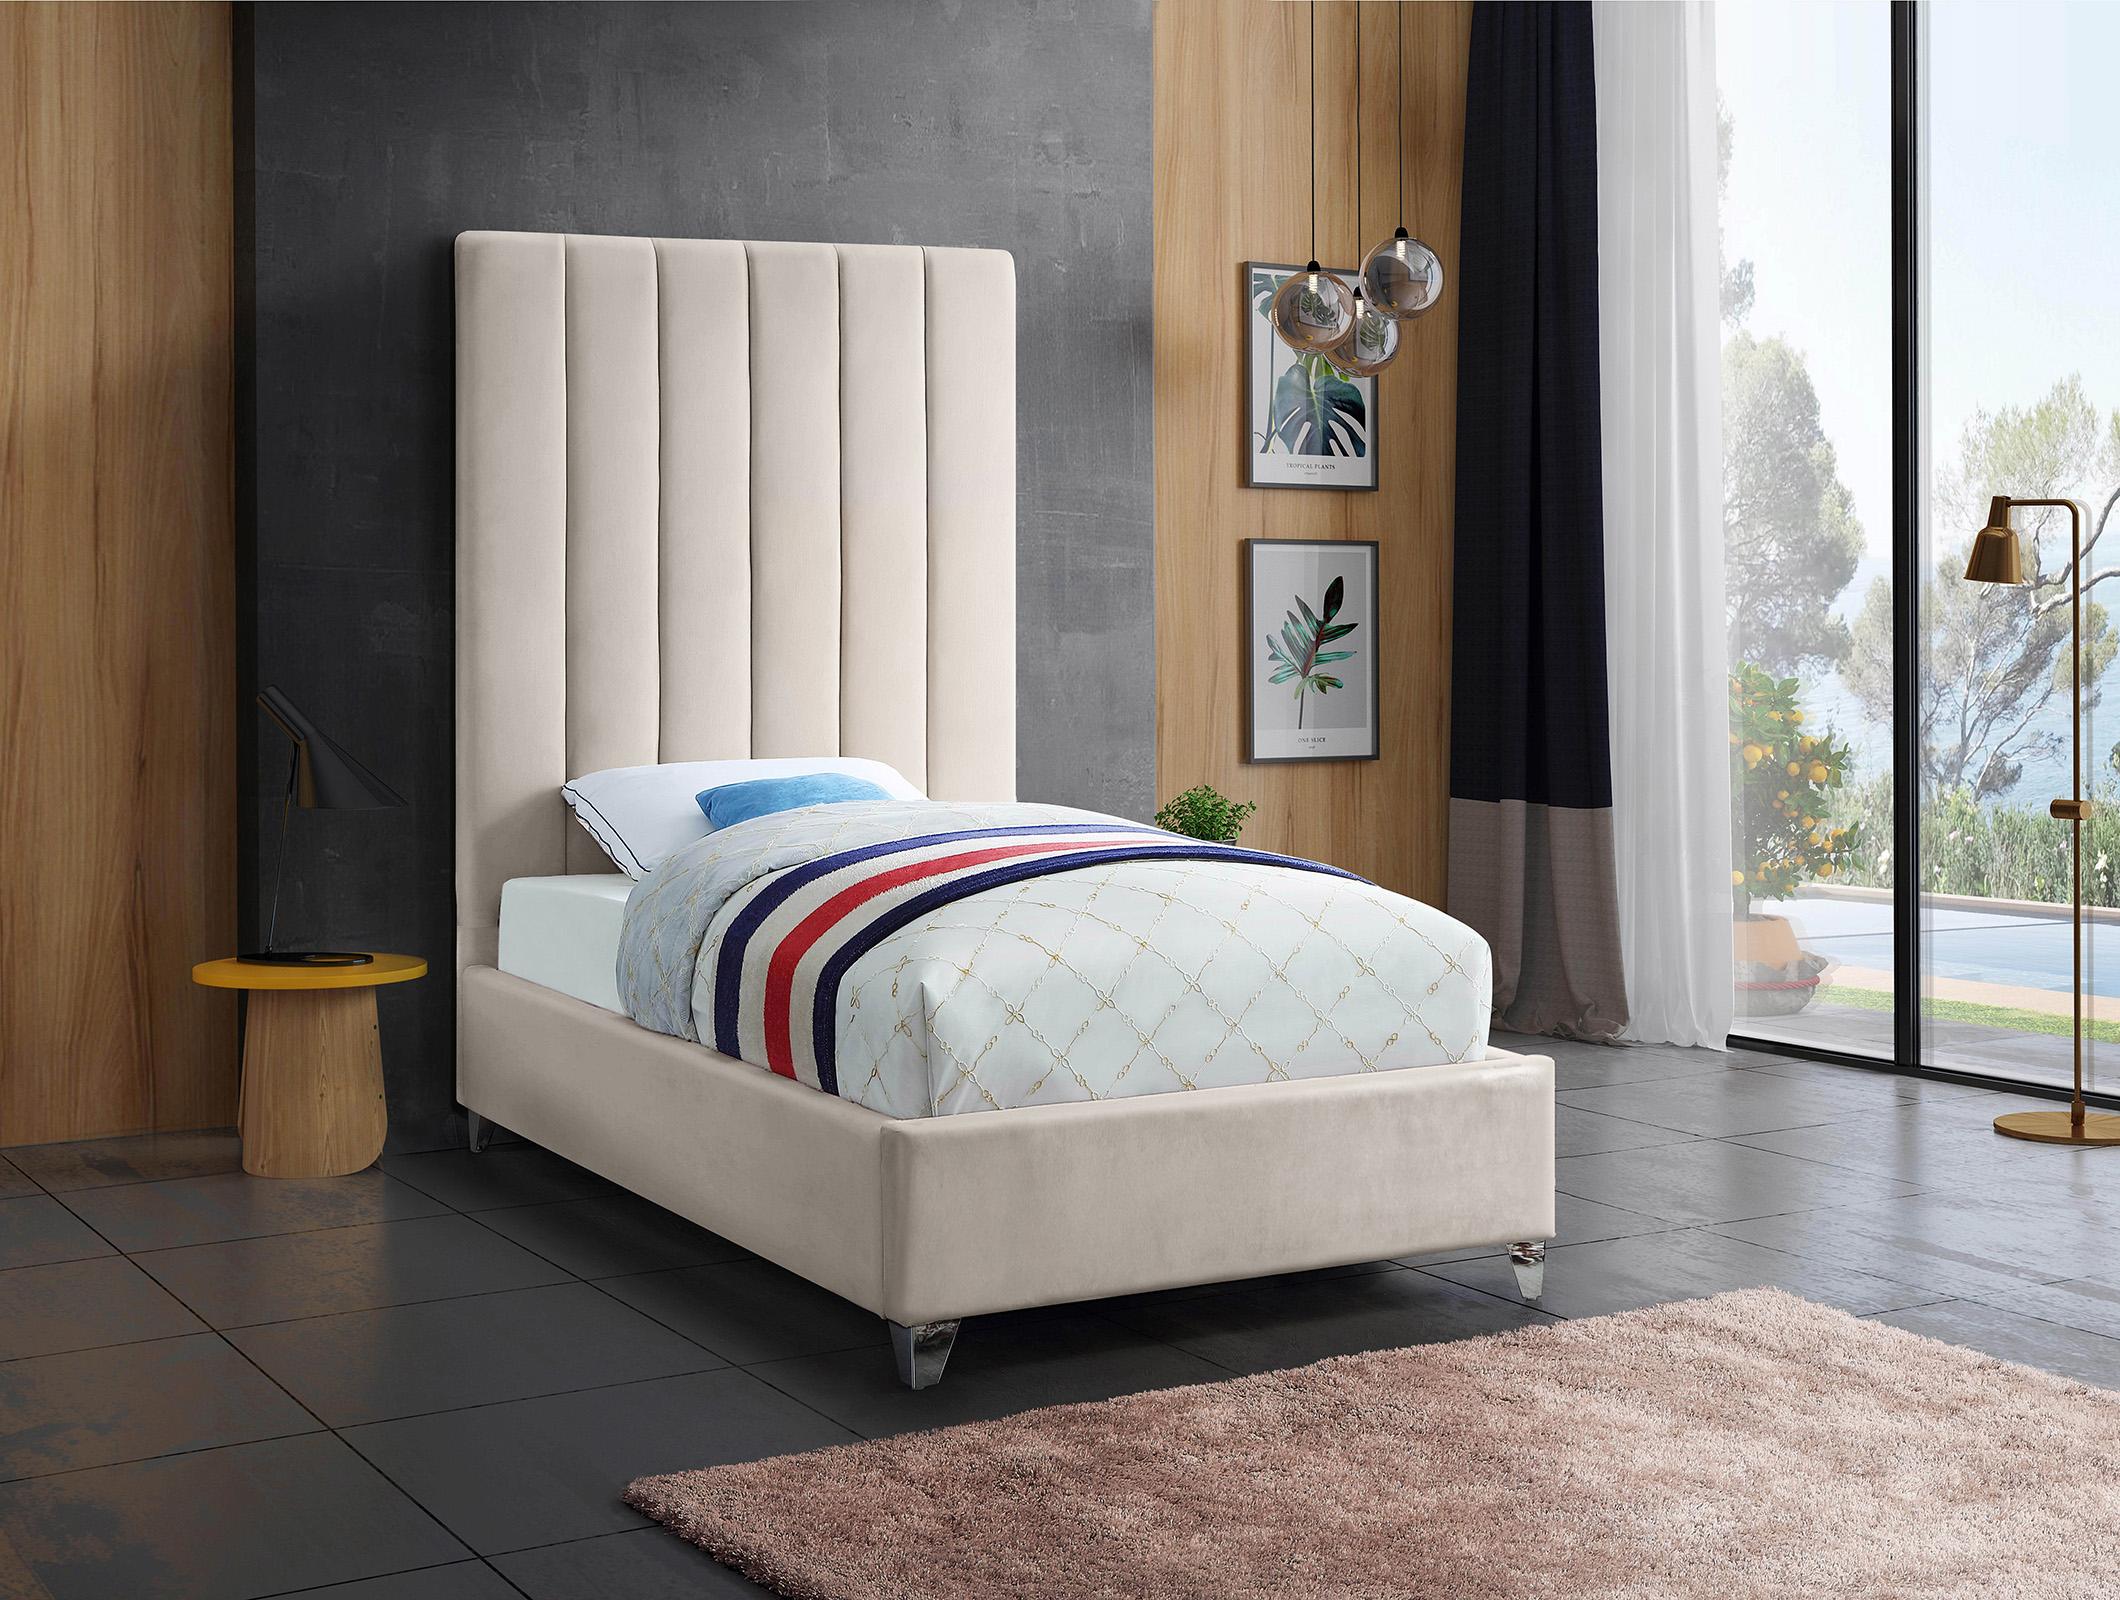 

    
Cream Velvet Channel Tufted Twin Bed VIA Meridian Contemporary Modern
